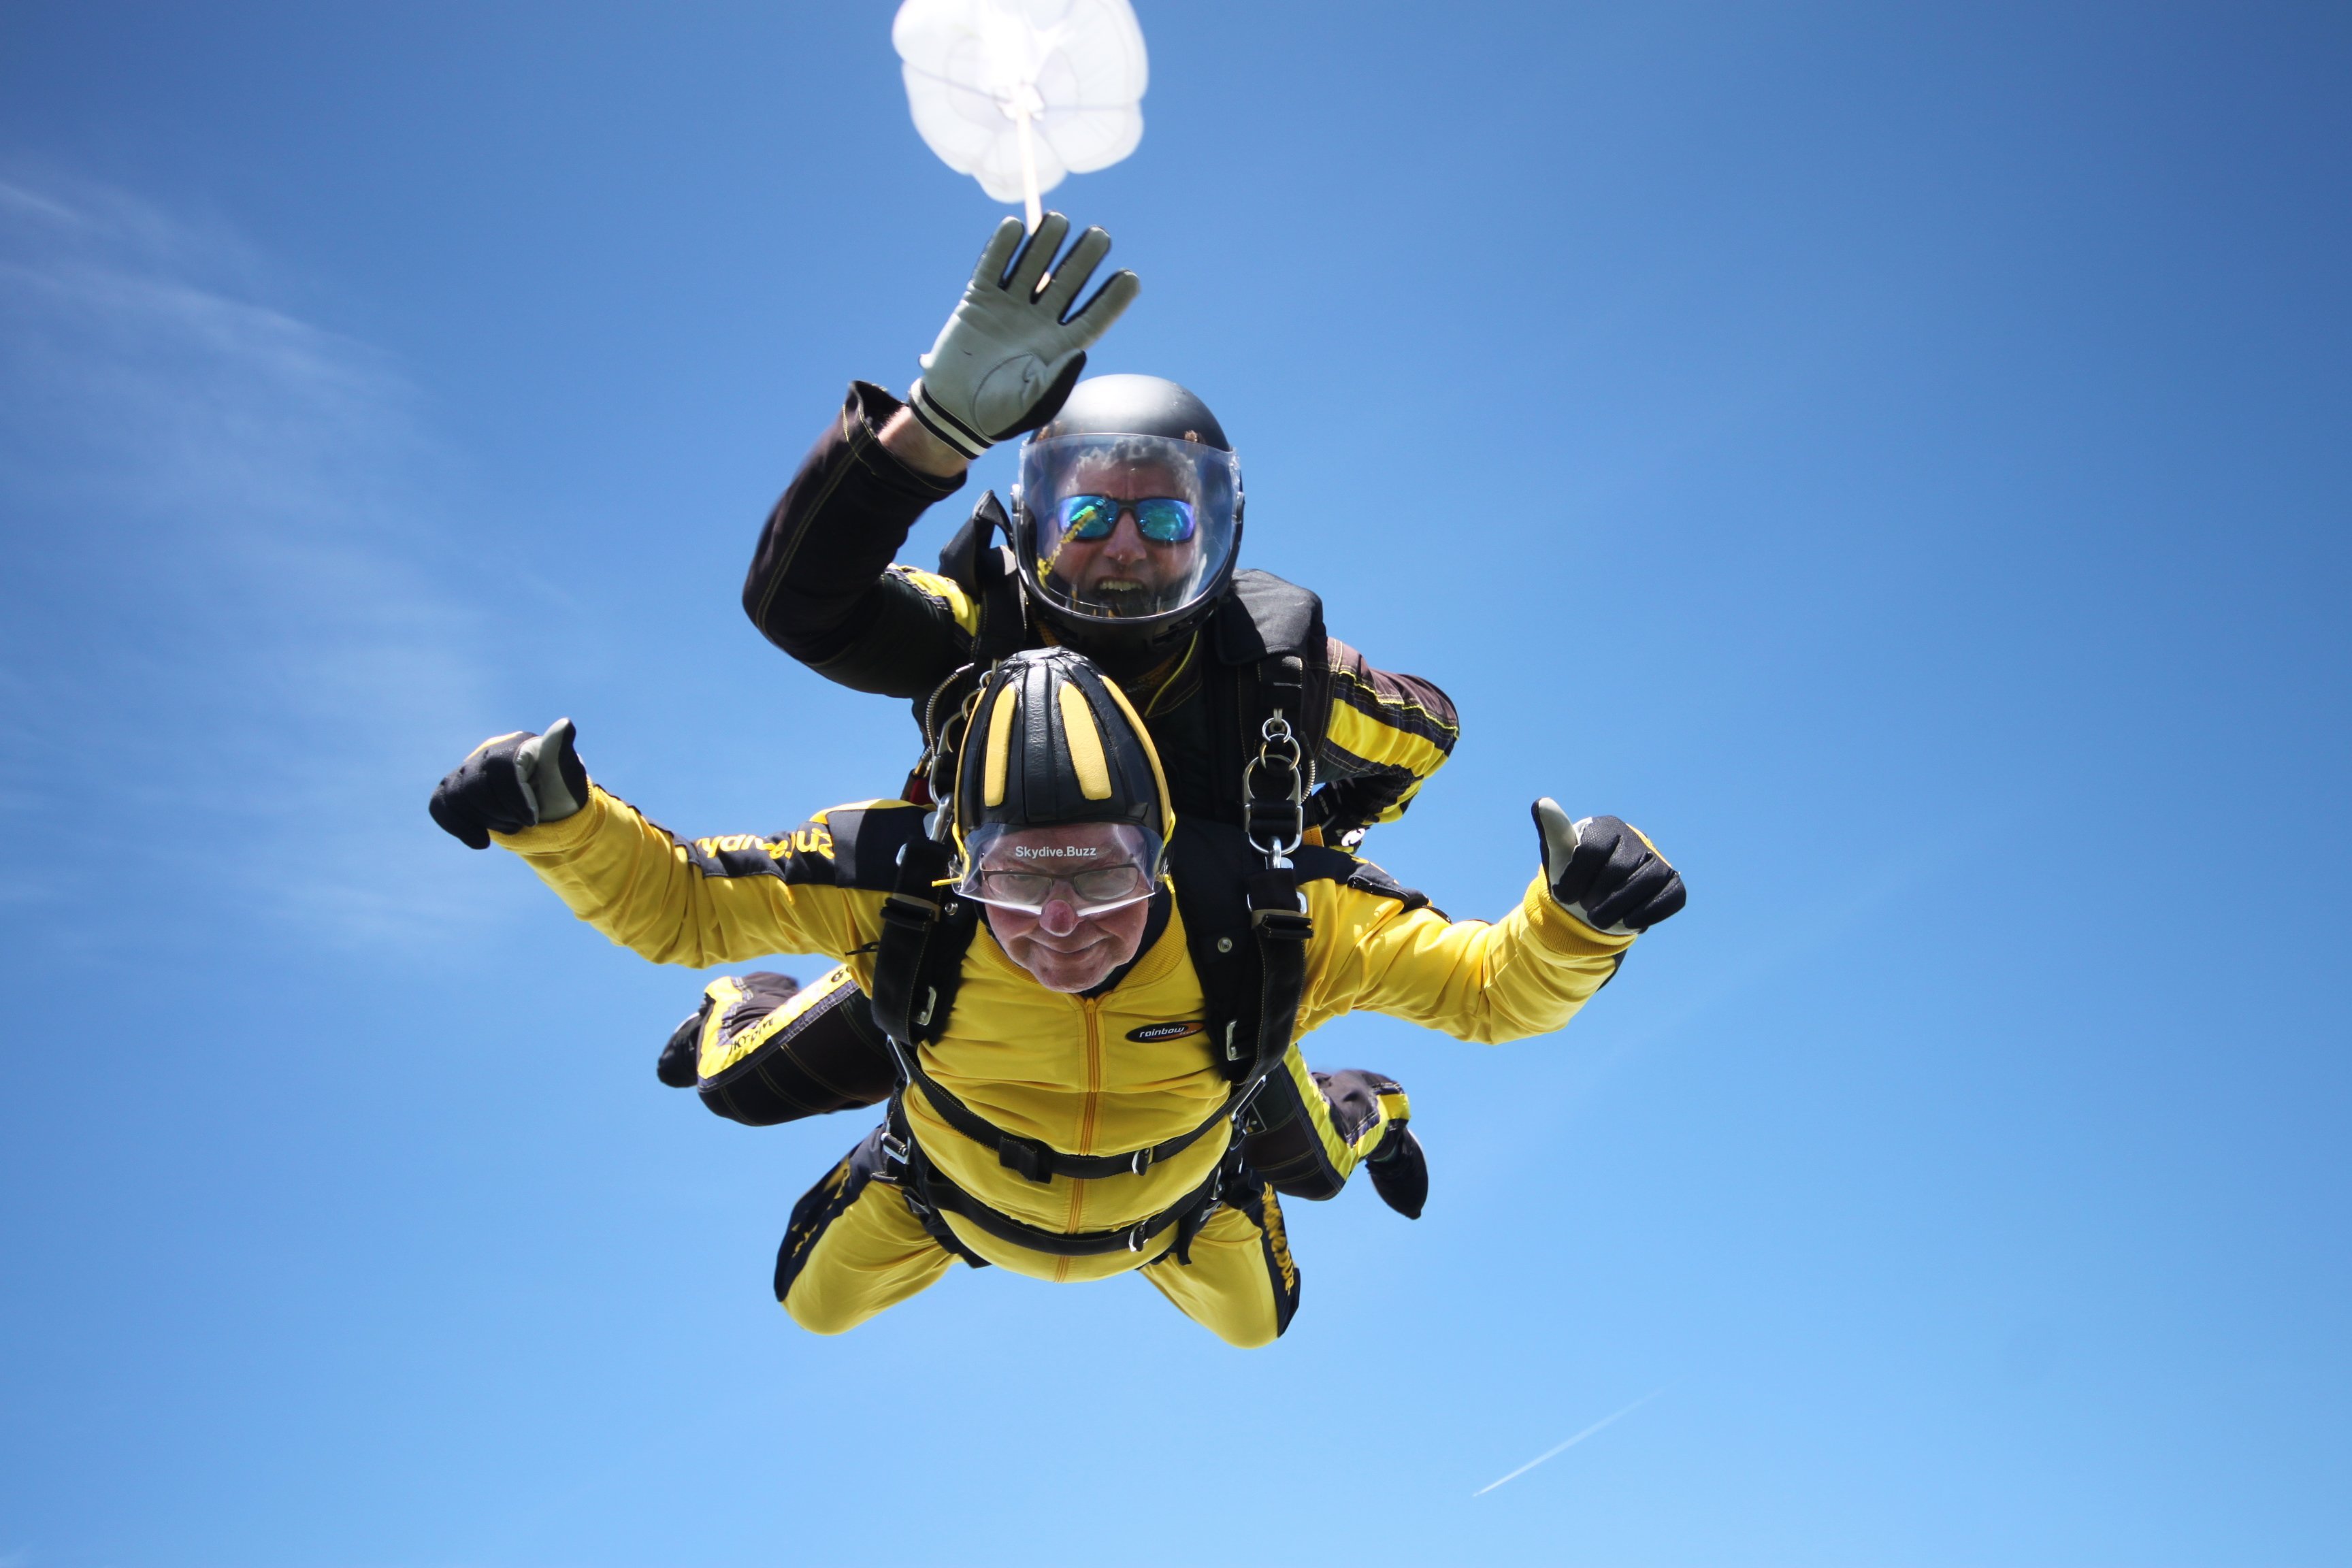 101-Year-Old 'Daredevil' From England Sets New Skydiving Record | KTLA